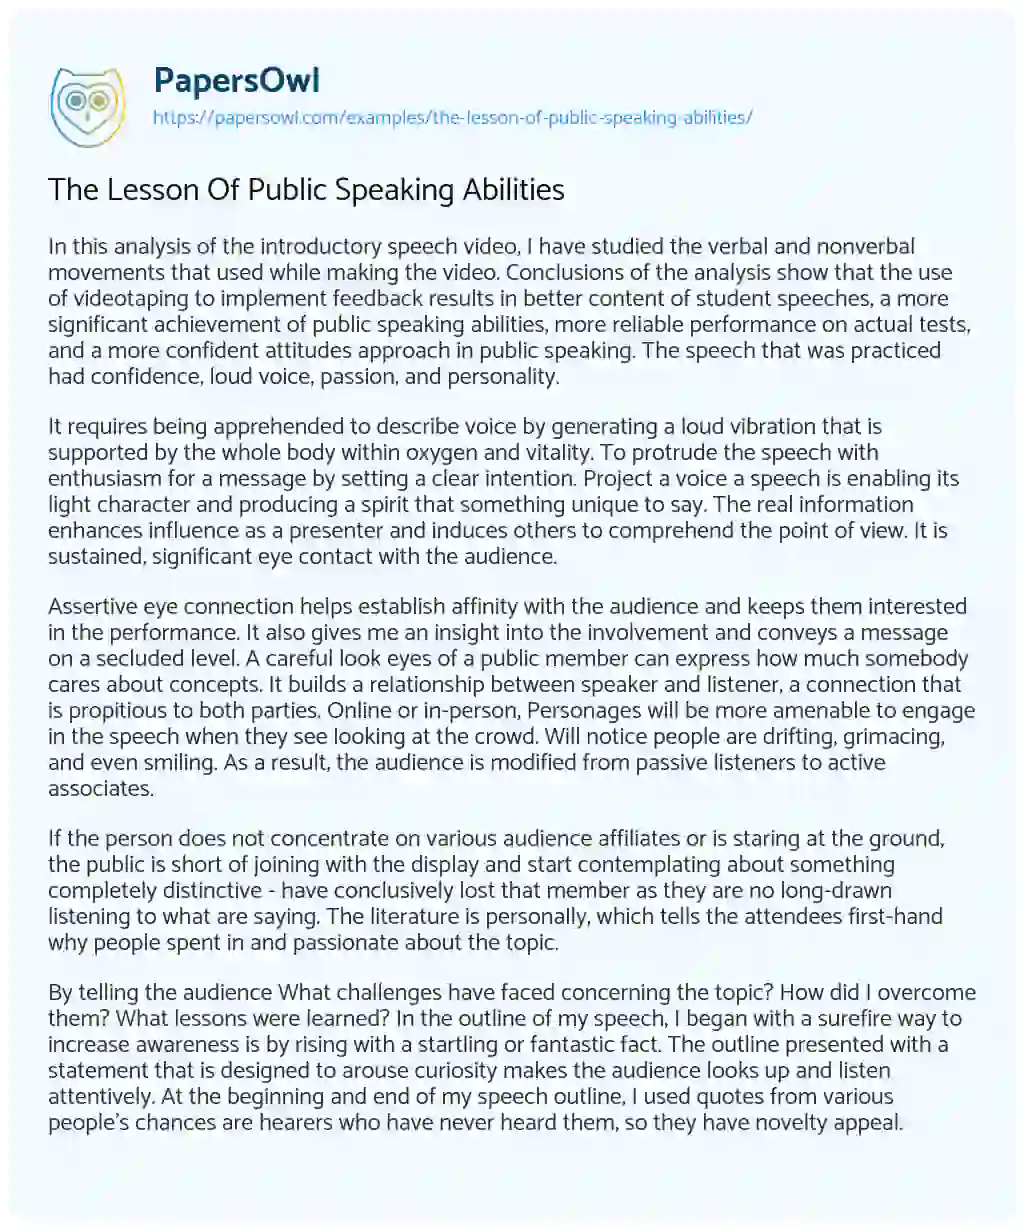 Essay on The Lesson of Public Speaking Abilities